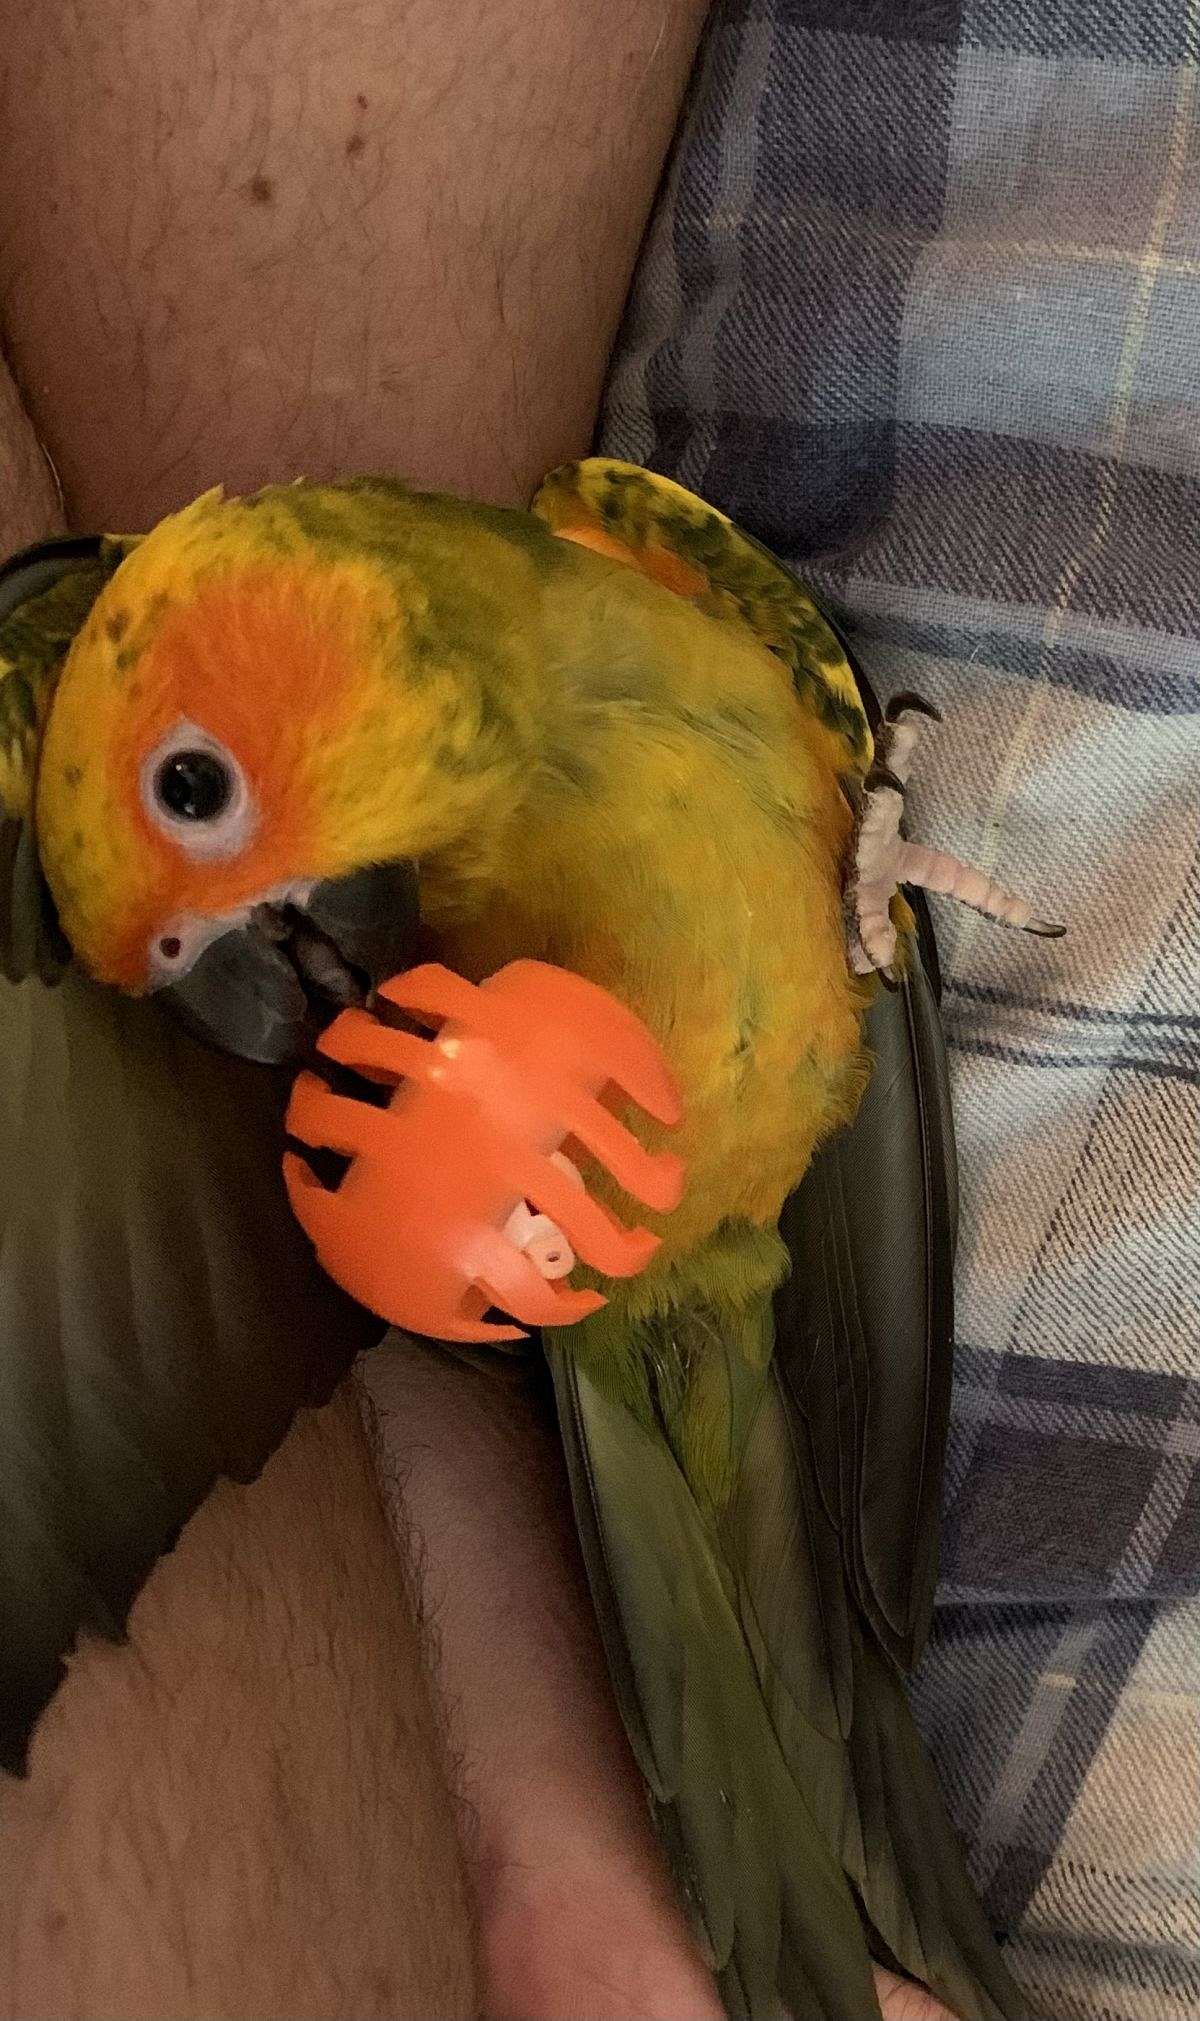 Gizmo. The fun and very charismatic conure.